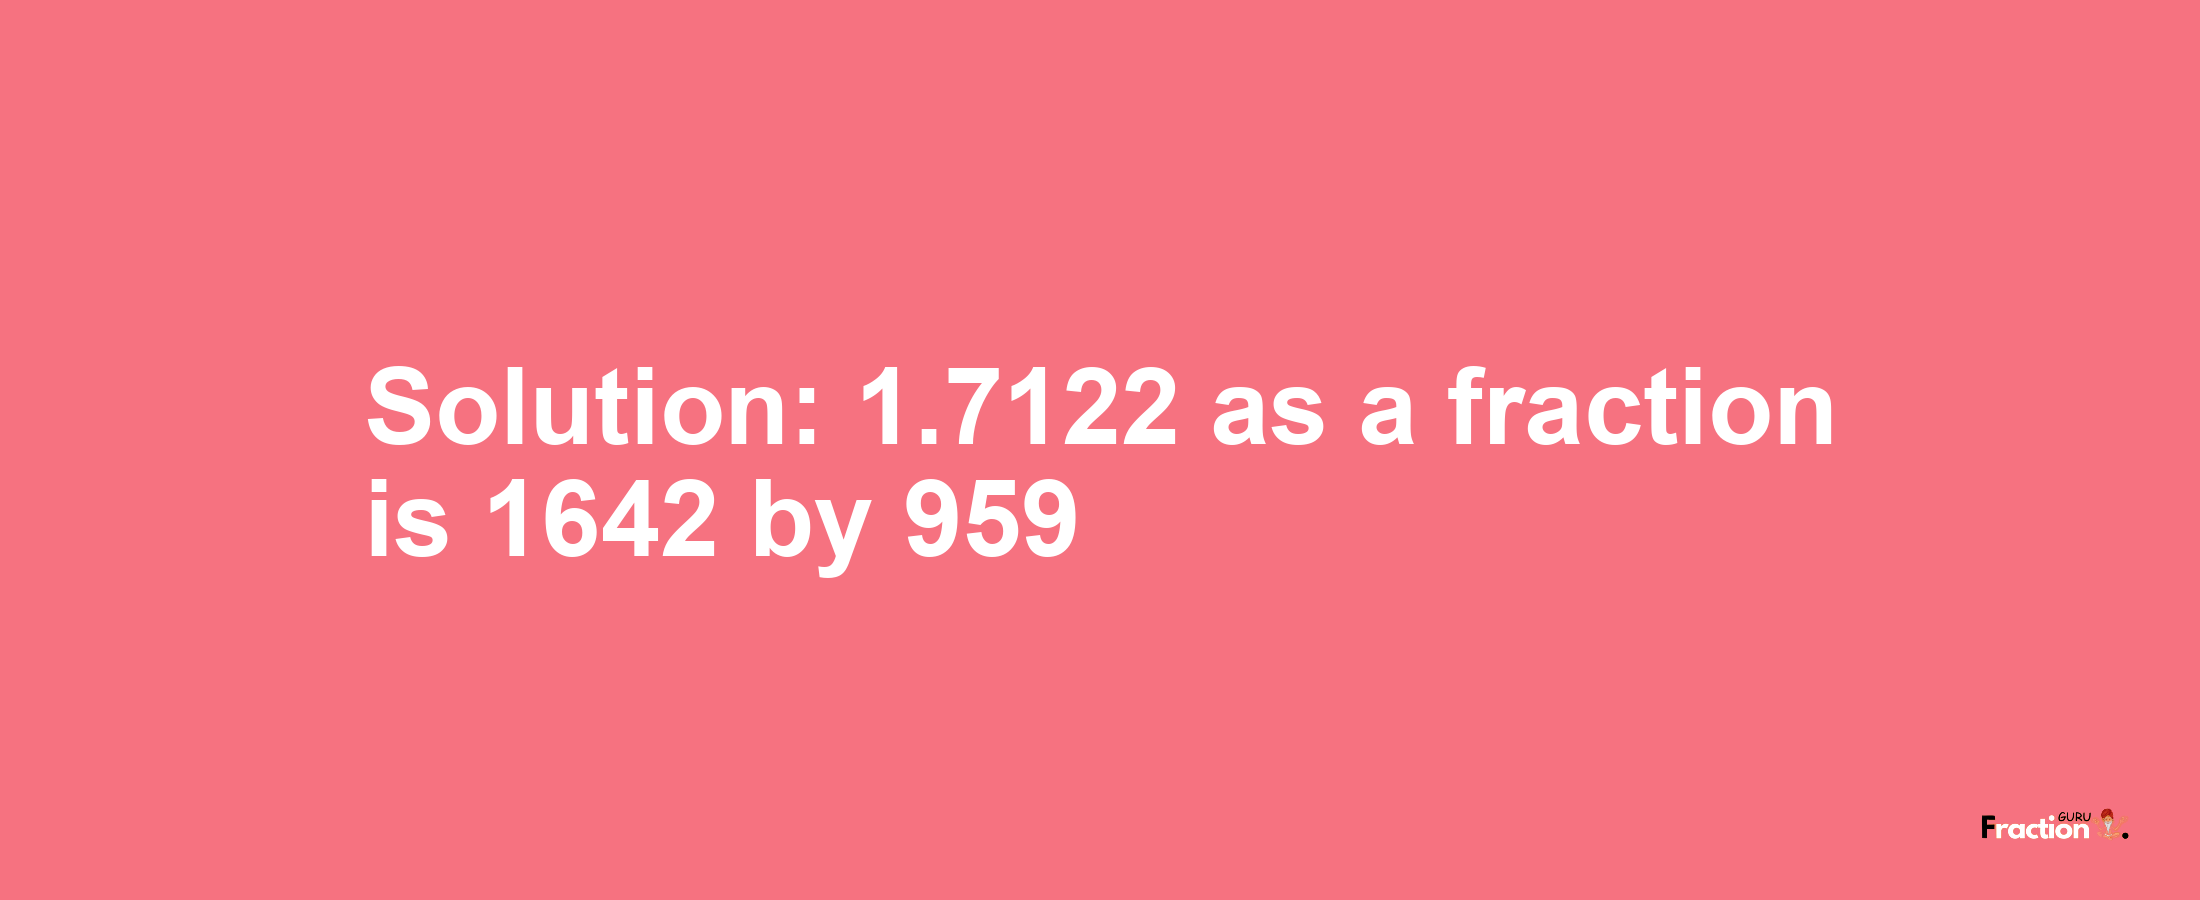 Solution:1.7122 as a fraction is 1642/959